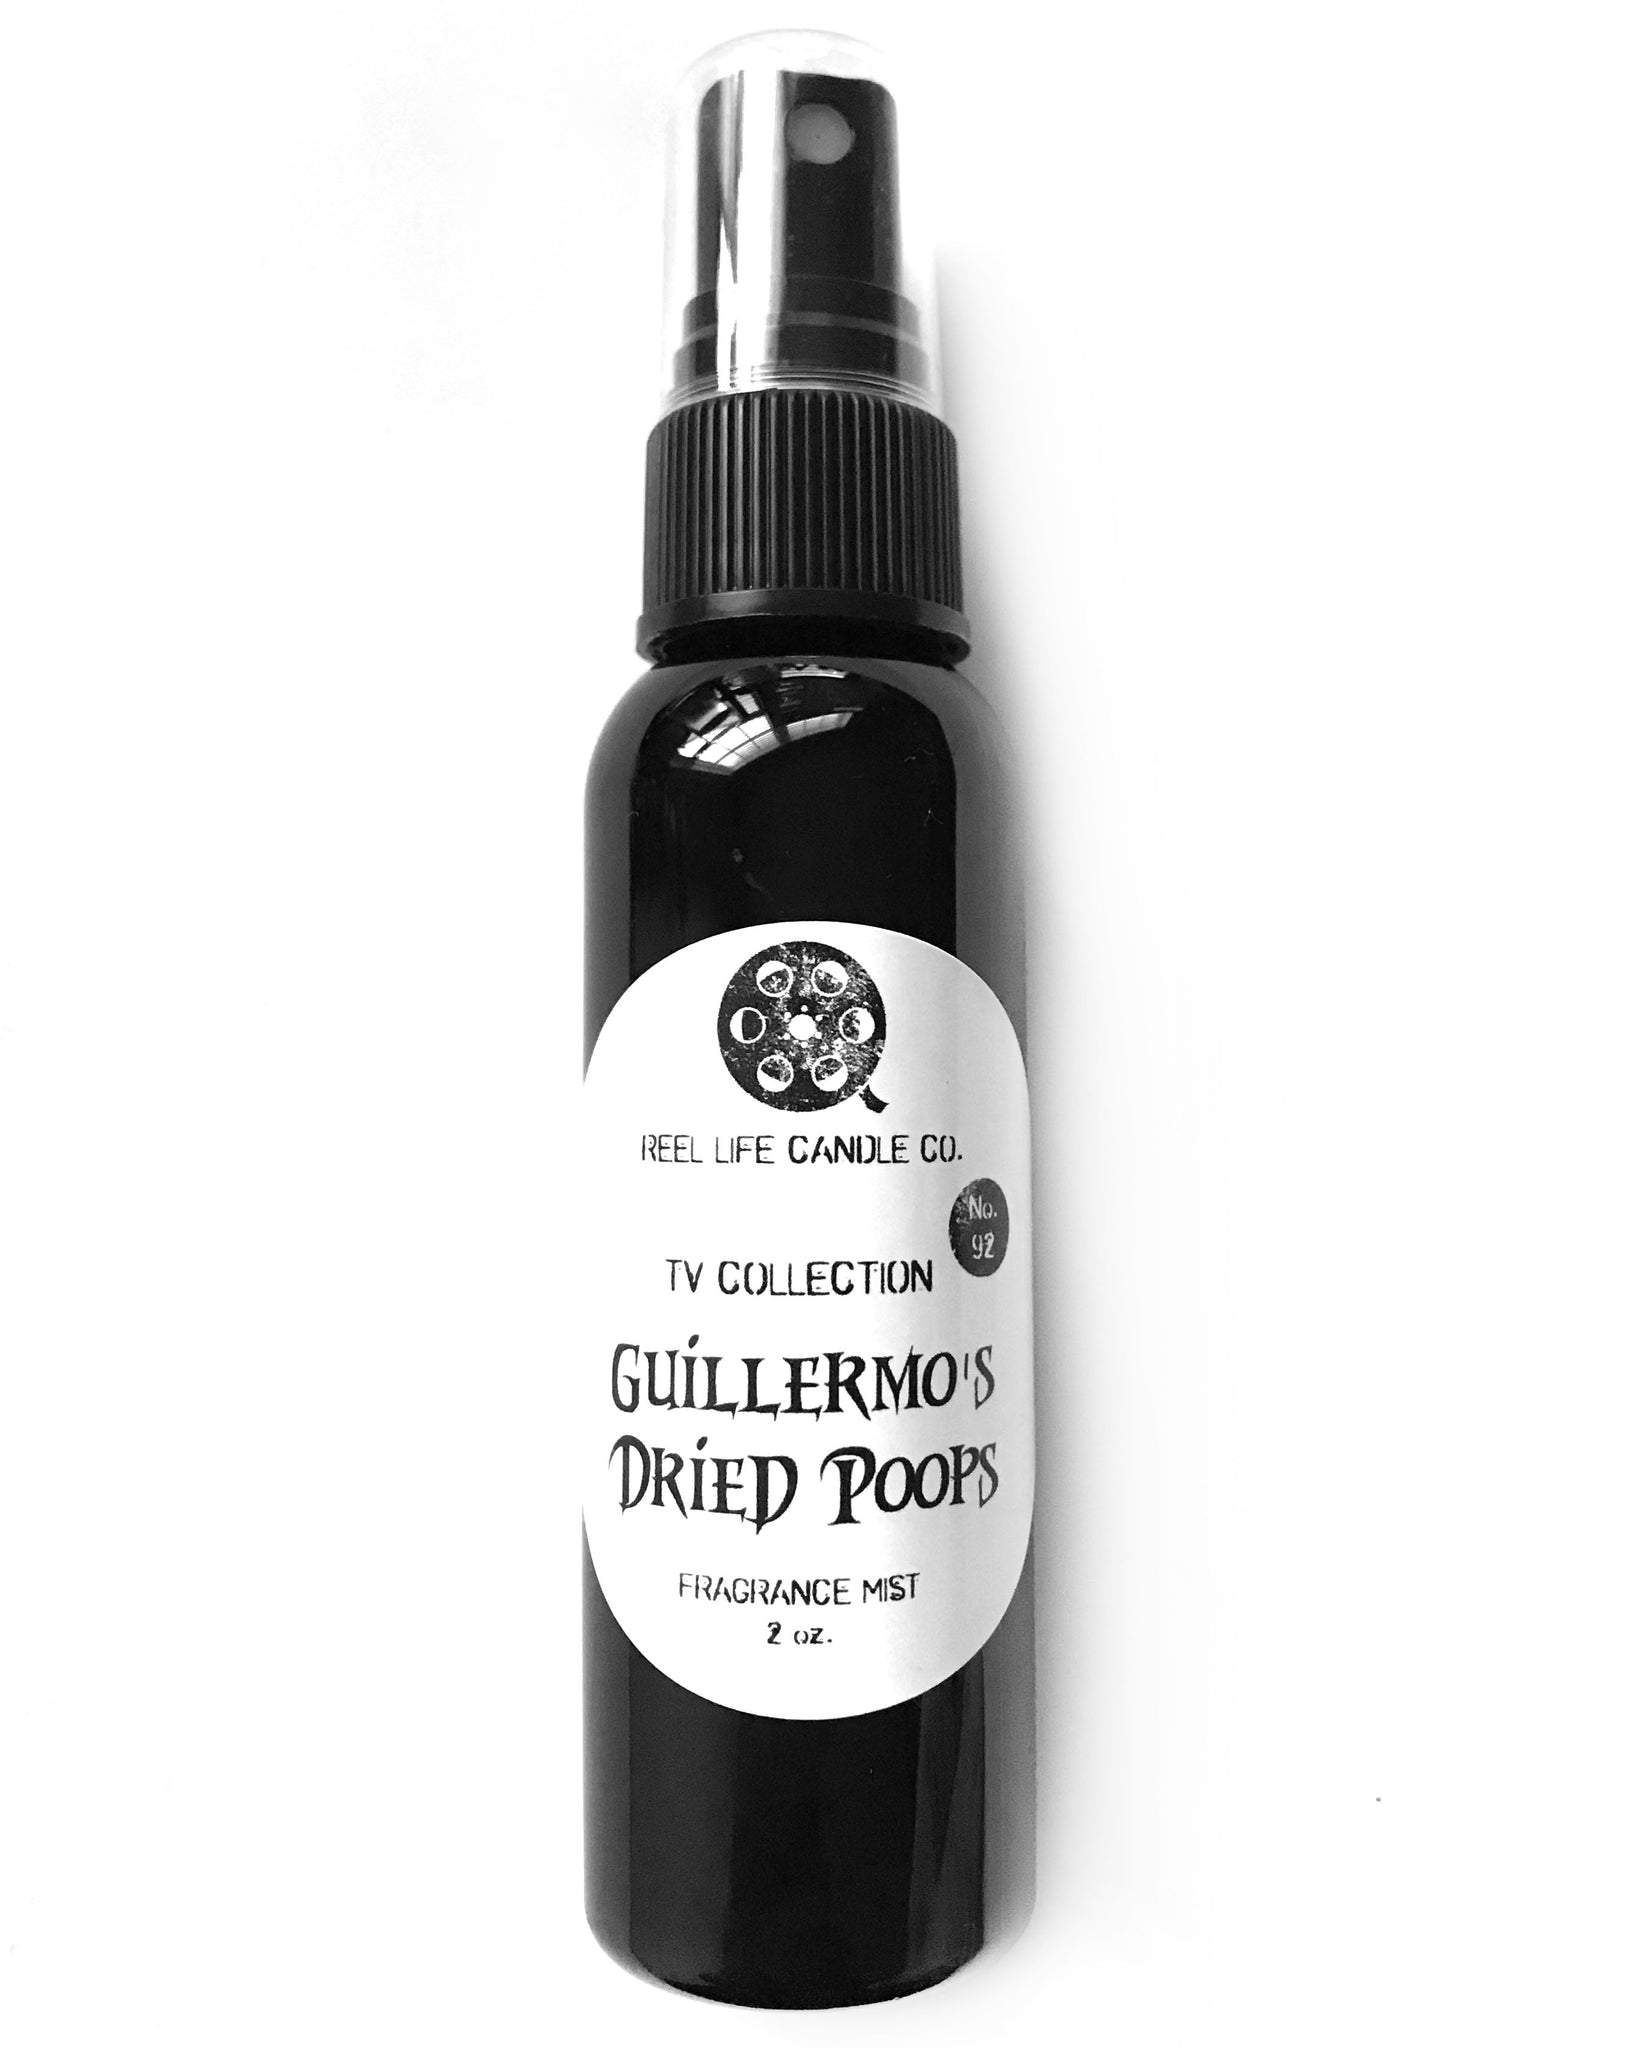 Guillermo's Dried Poops Fragrance Mist